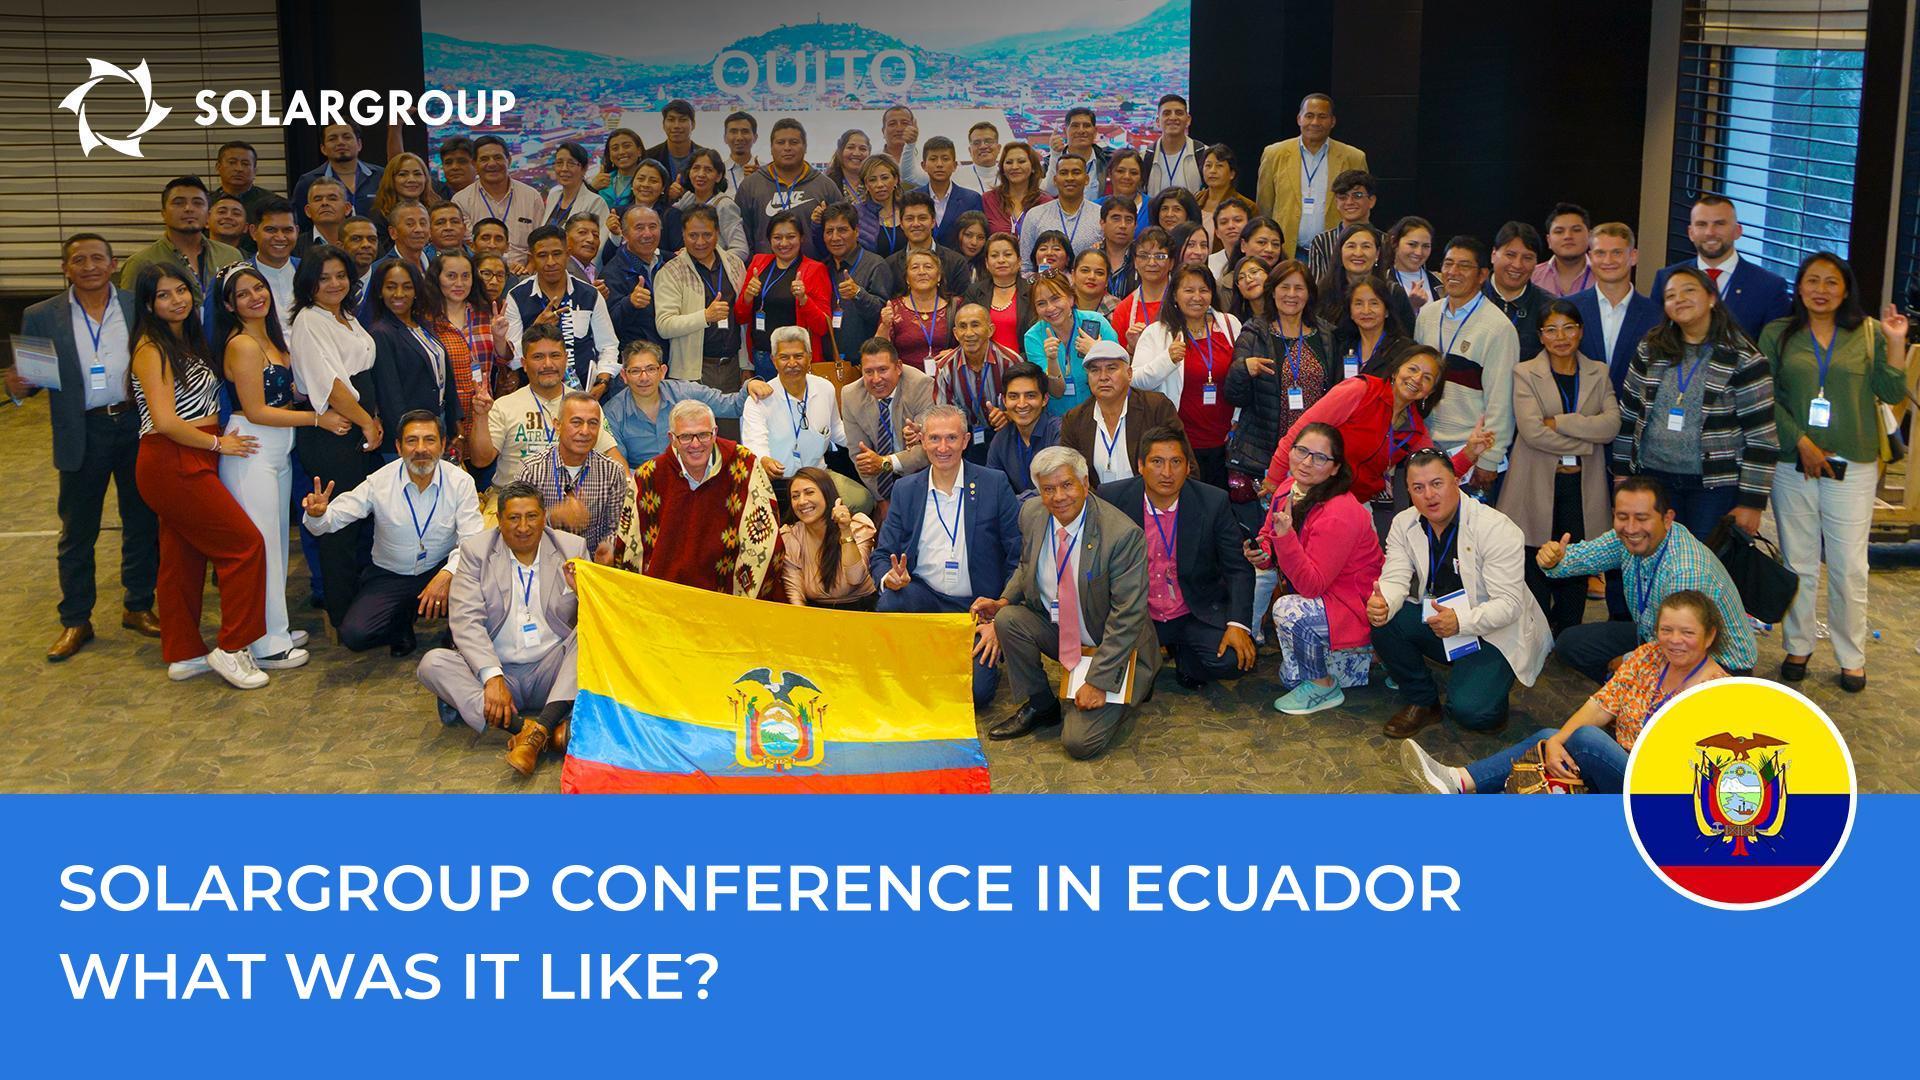 A celebration in Ecuador: What the SOLARGROUP conference in Quito was like?